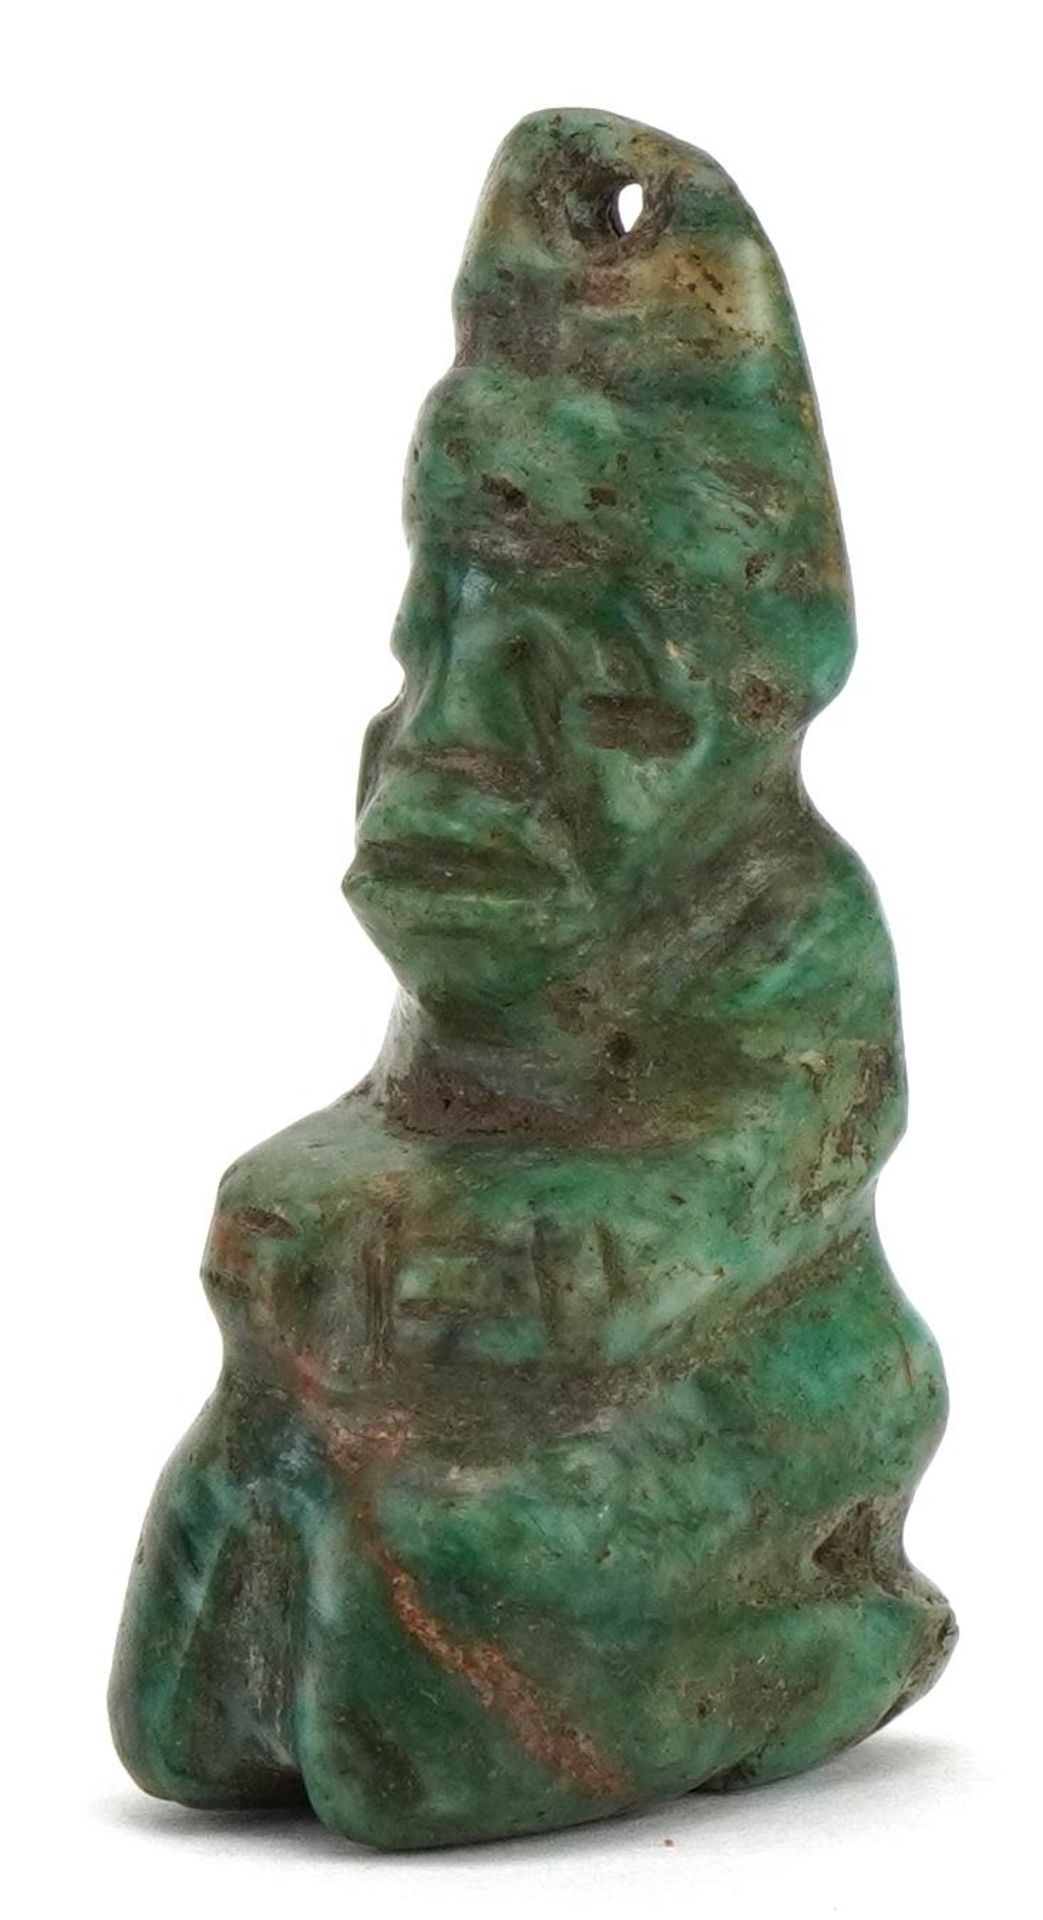 Tribal interest green hardstone figural pendant, probably Mayan or pre Columbian, 4.5cm high : For